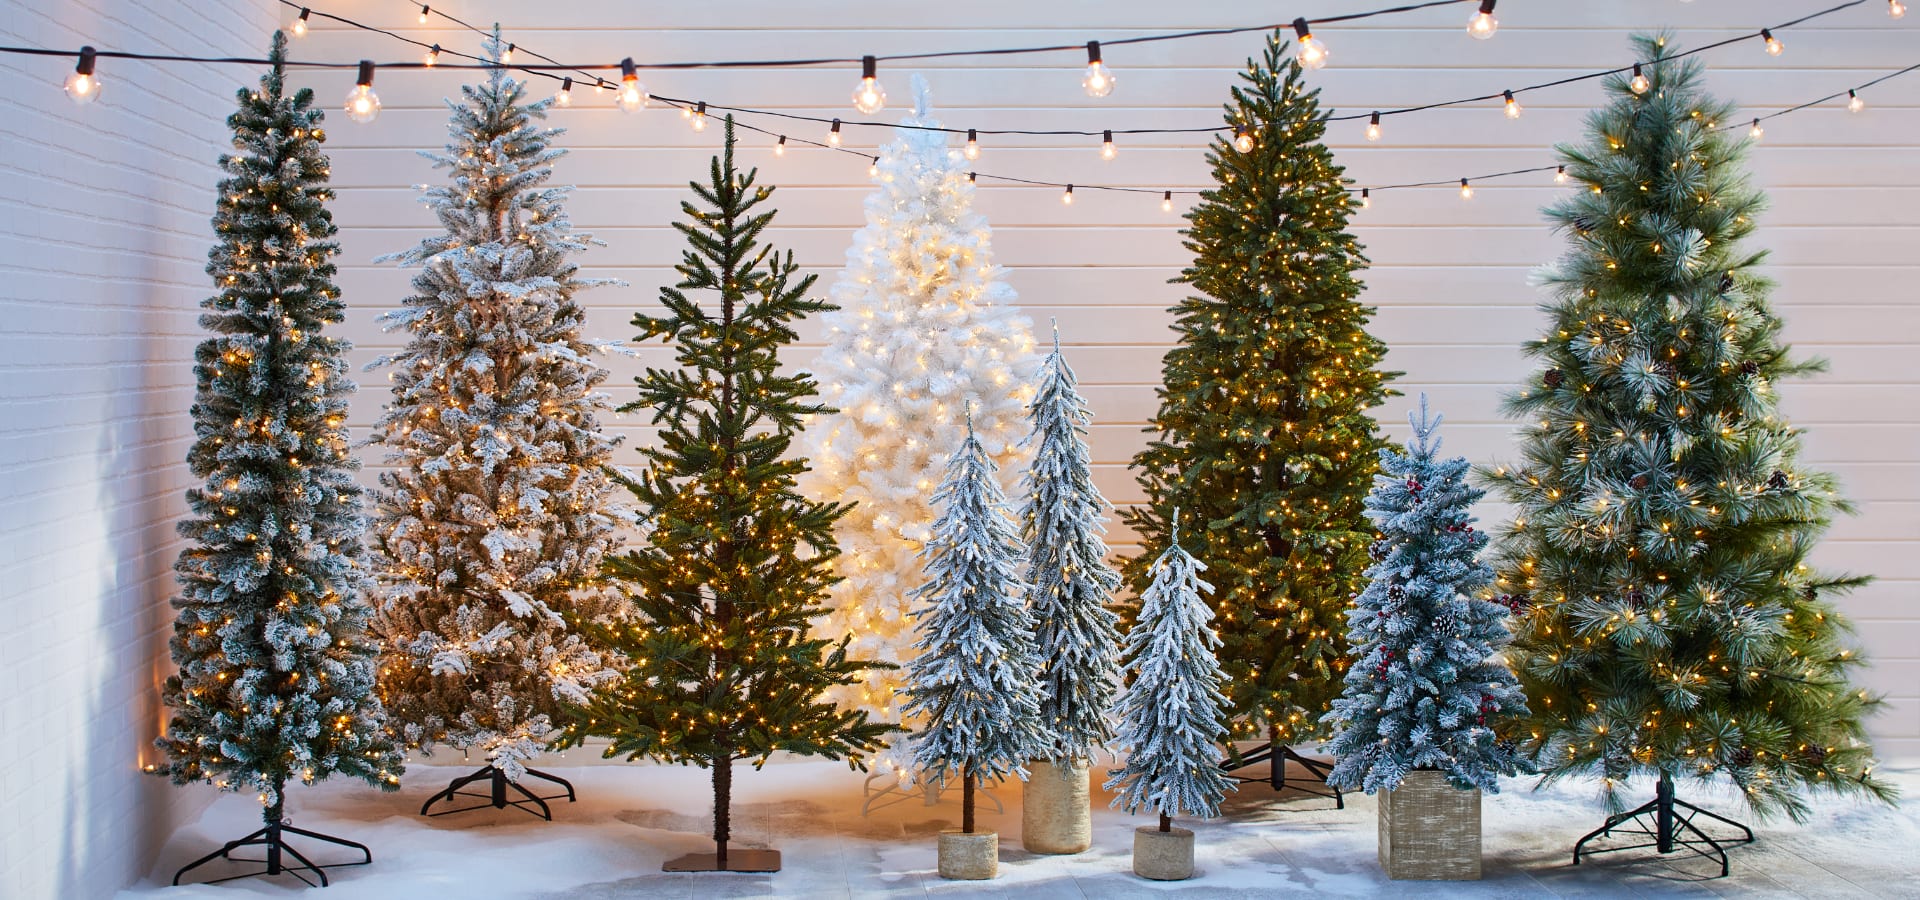 Assortment of Christmas trees in various shapes and sizes in front of a wood wall